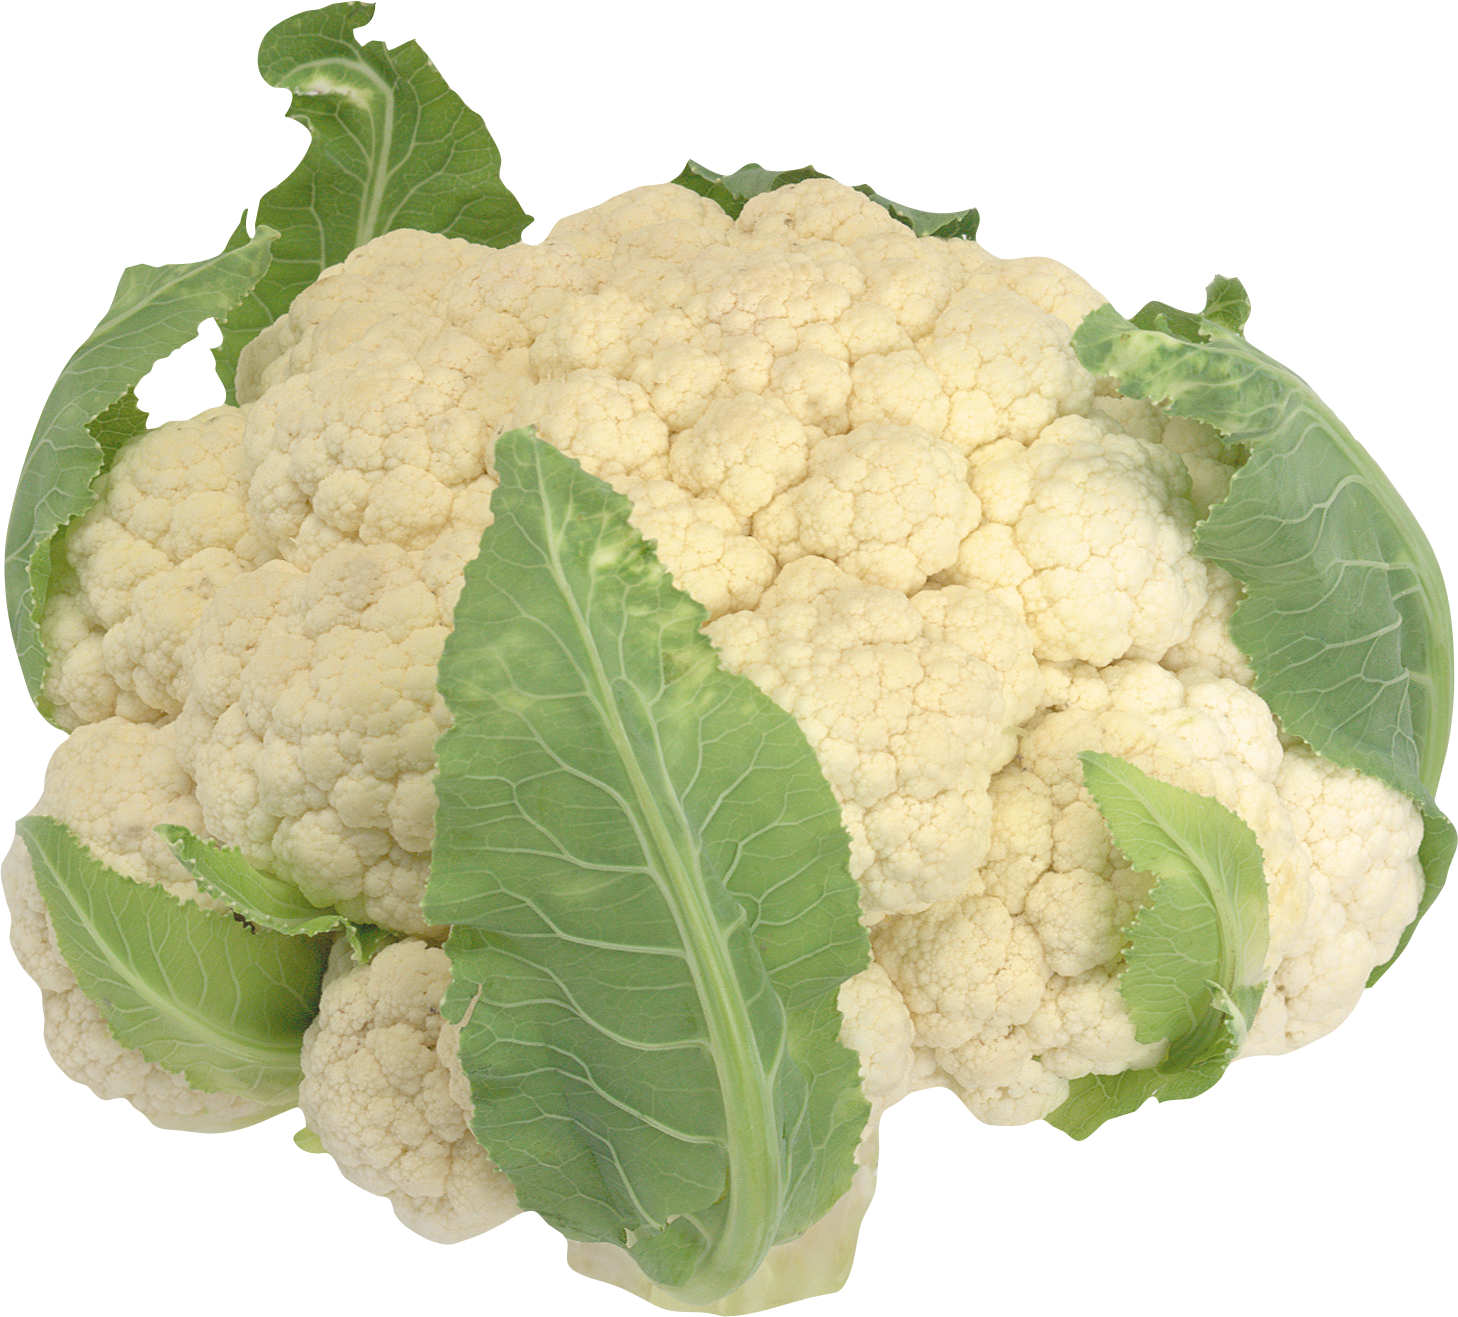 Cauliflower PNG images Download